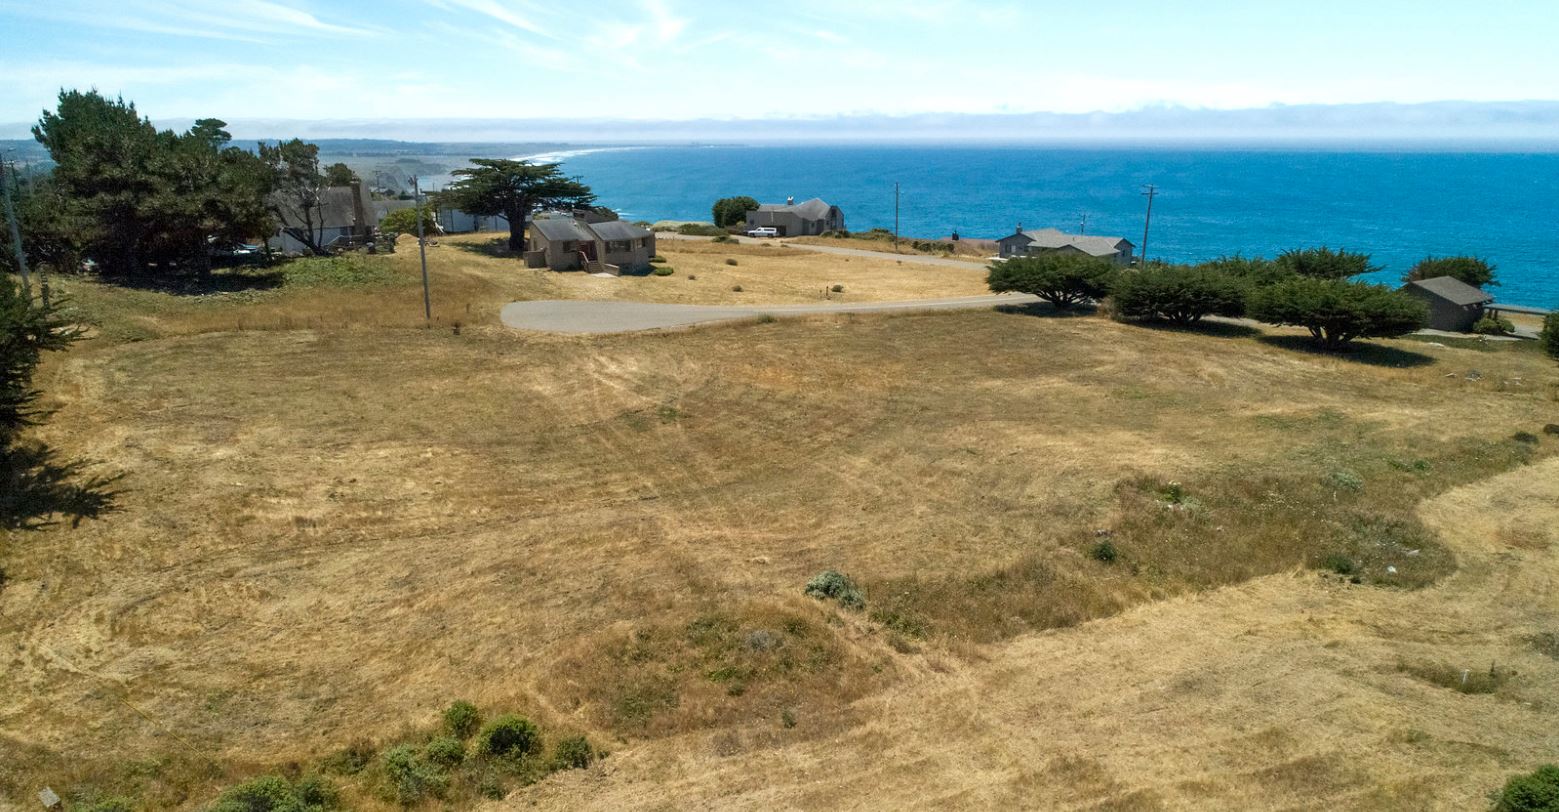 Grassy Northern California clifftop with a few homes overlooking the ocean